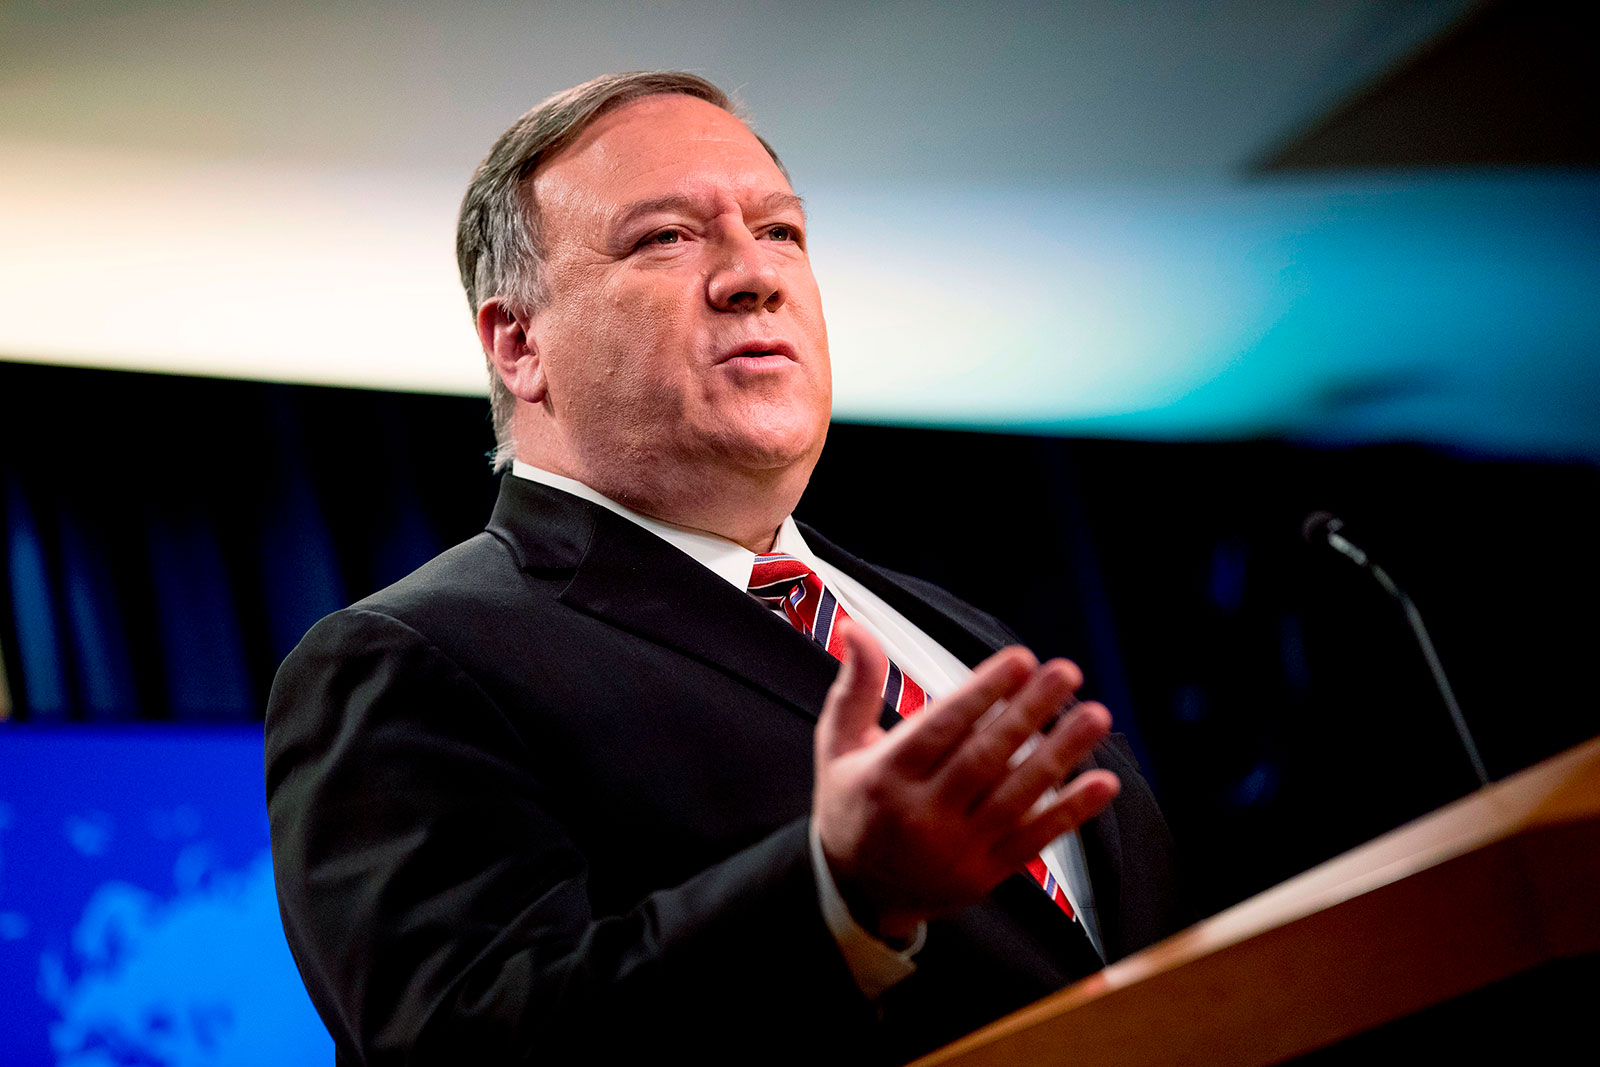 US Secretary of State Mike Pompeo has repeatedly condemned Beijing for a lack of transparency about the pandemic.